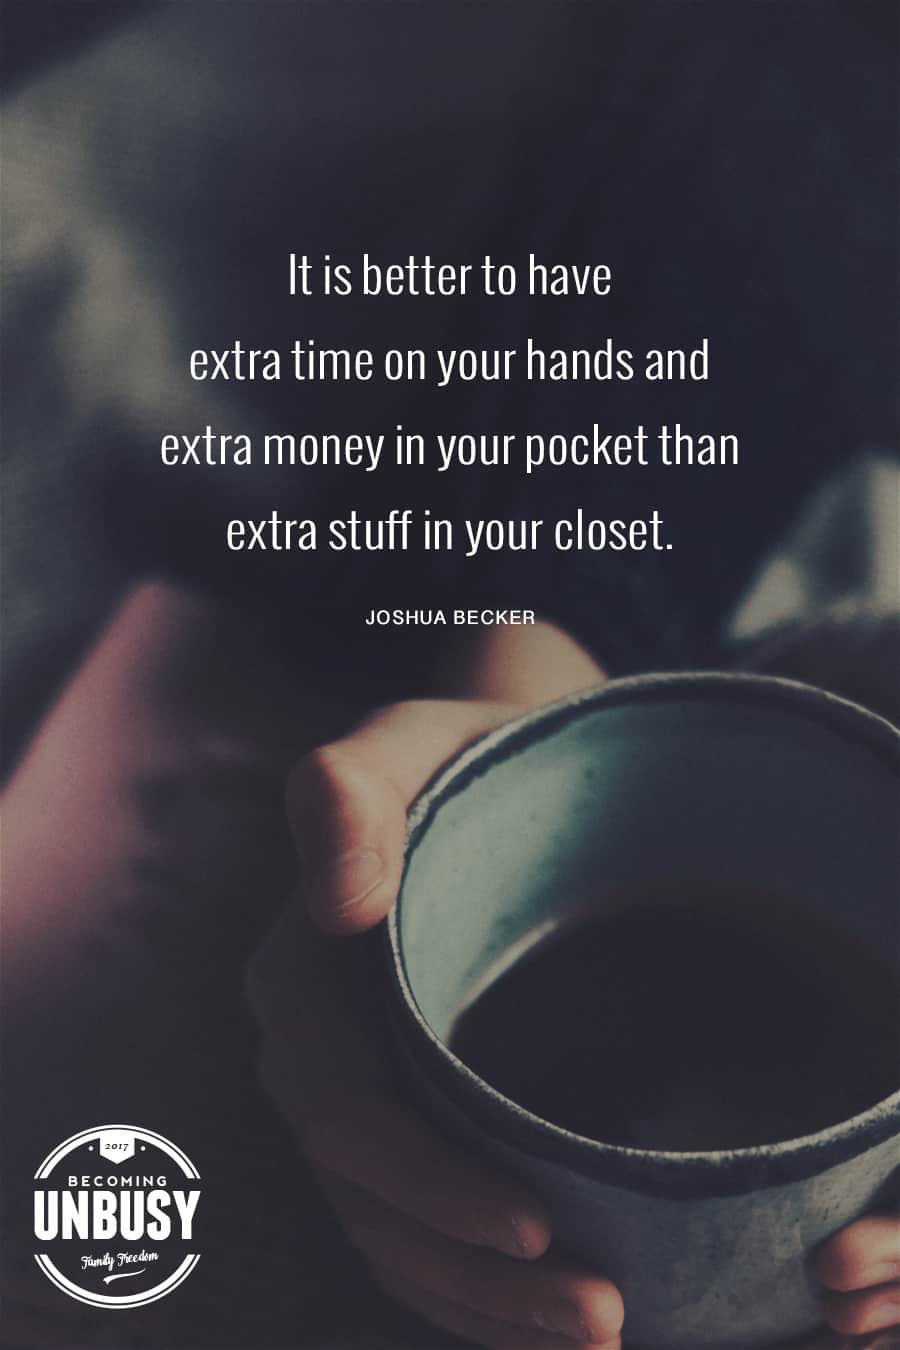 It's better to have extra time on your hands and extra money in your pocket than extra stuff in your closet. #uncluttered *Own less. Live more. Discover the life you've always wanted.